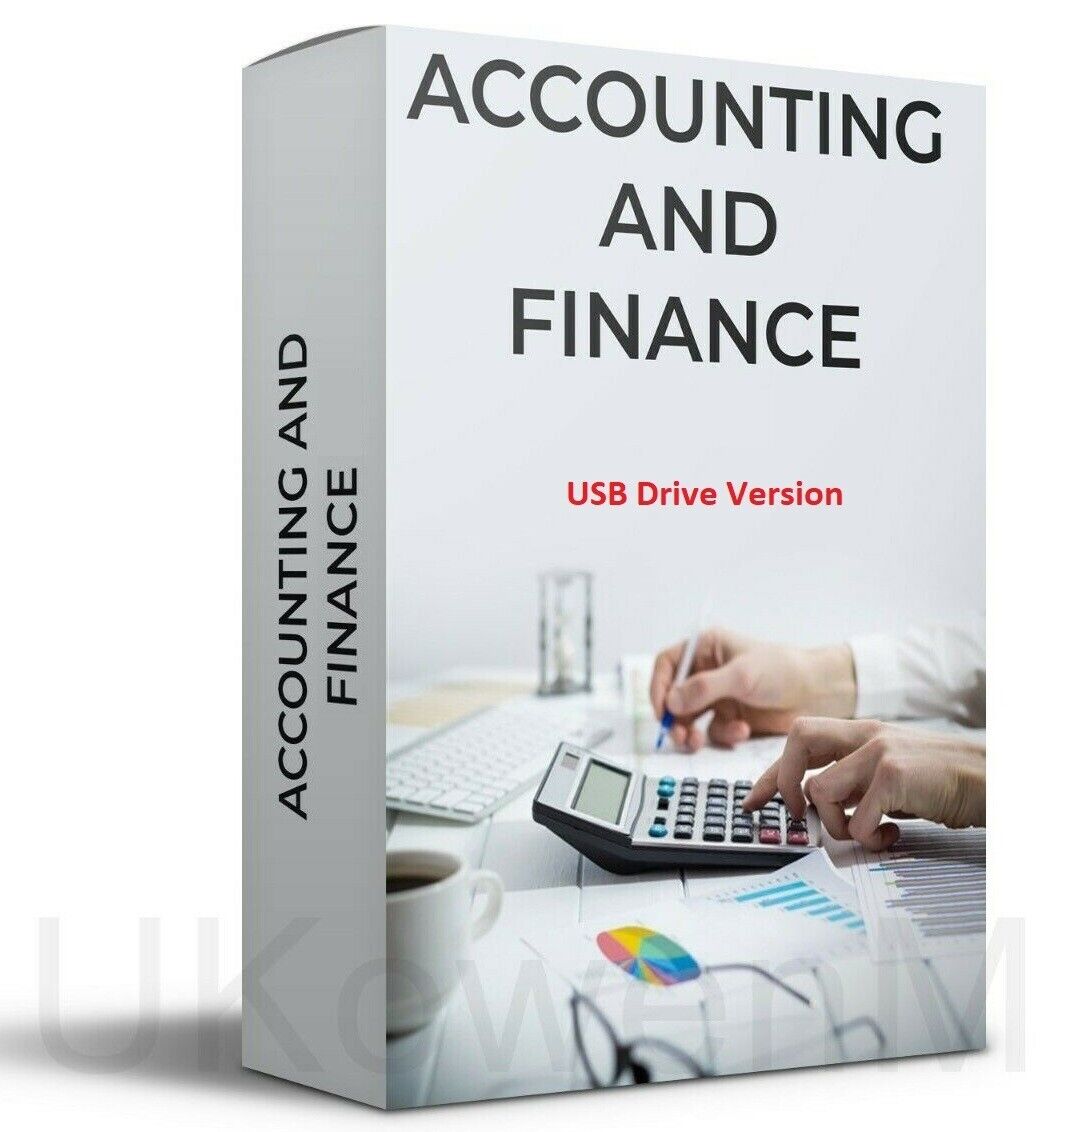 Accounting Small Business Finance Software Bookkeeping VAT Tax Self Employed USB